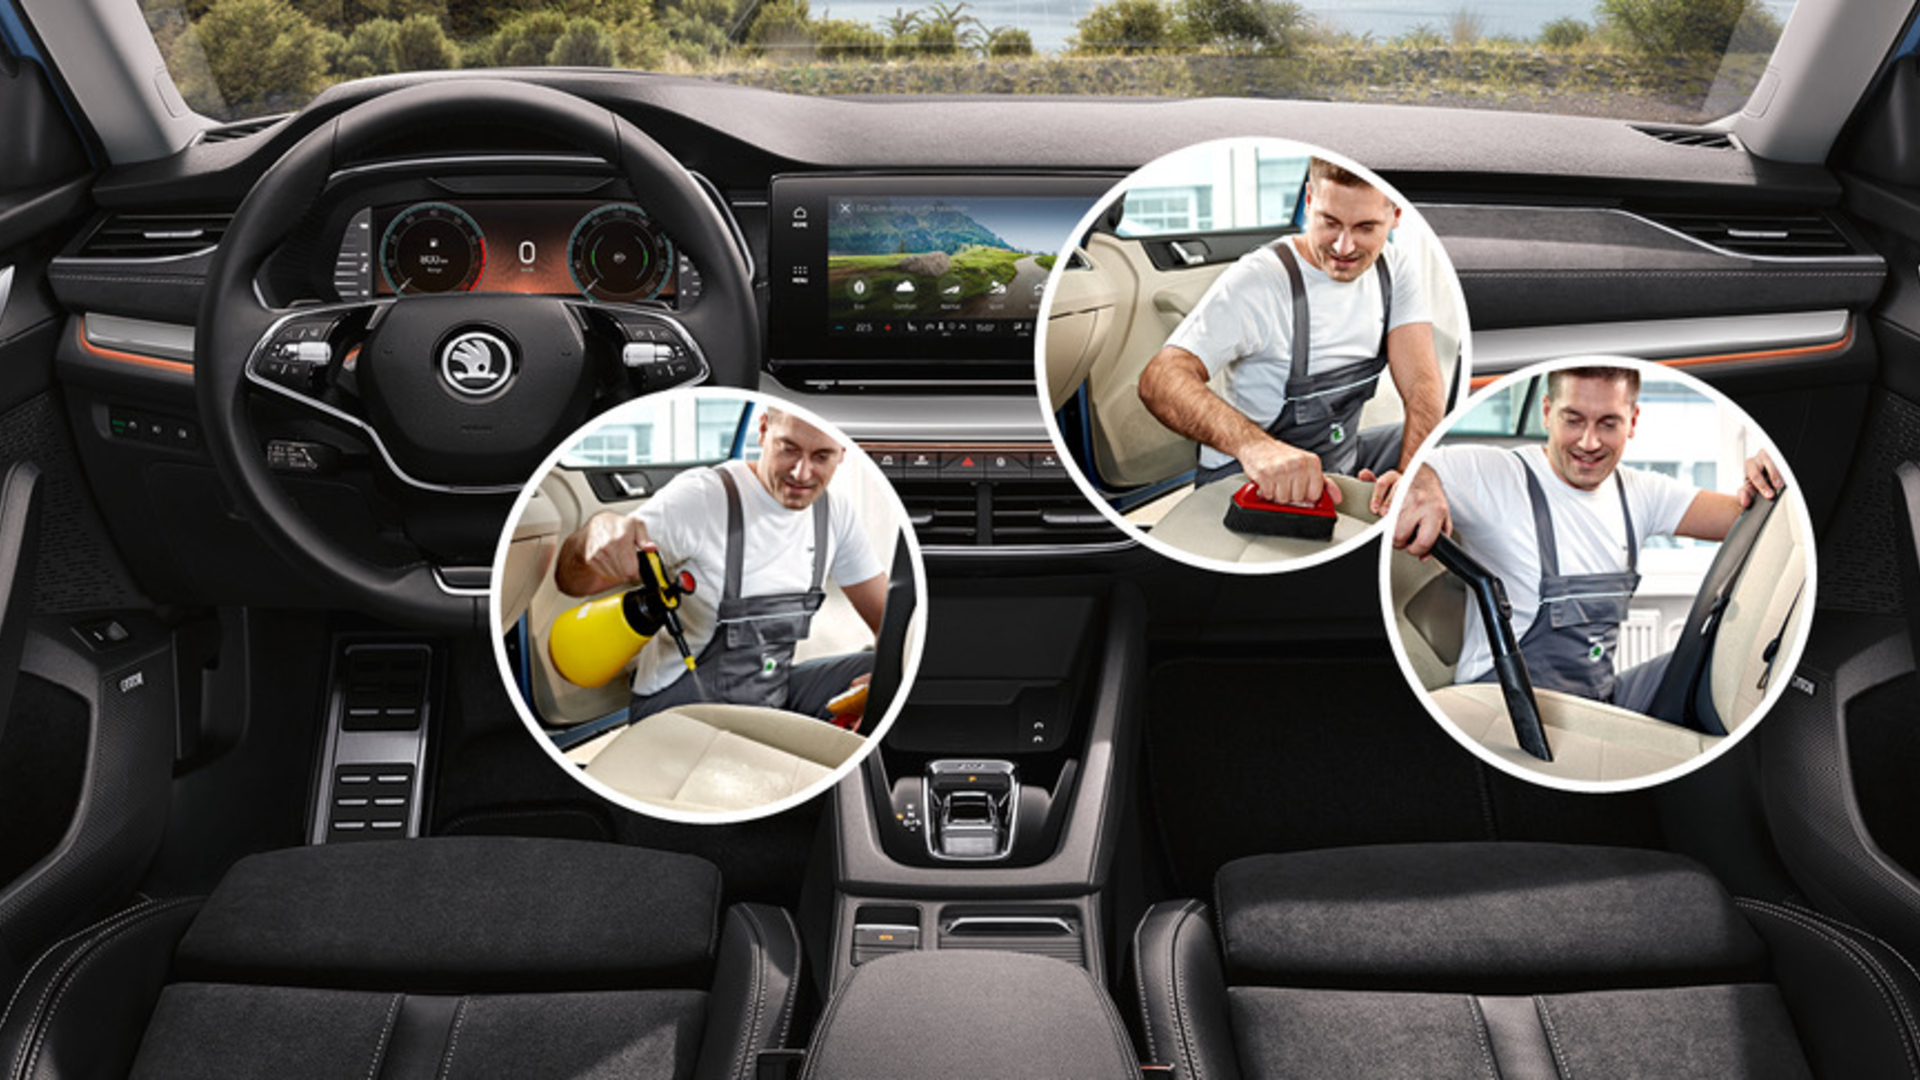 How to deep-clean the interior of your car